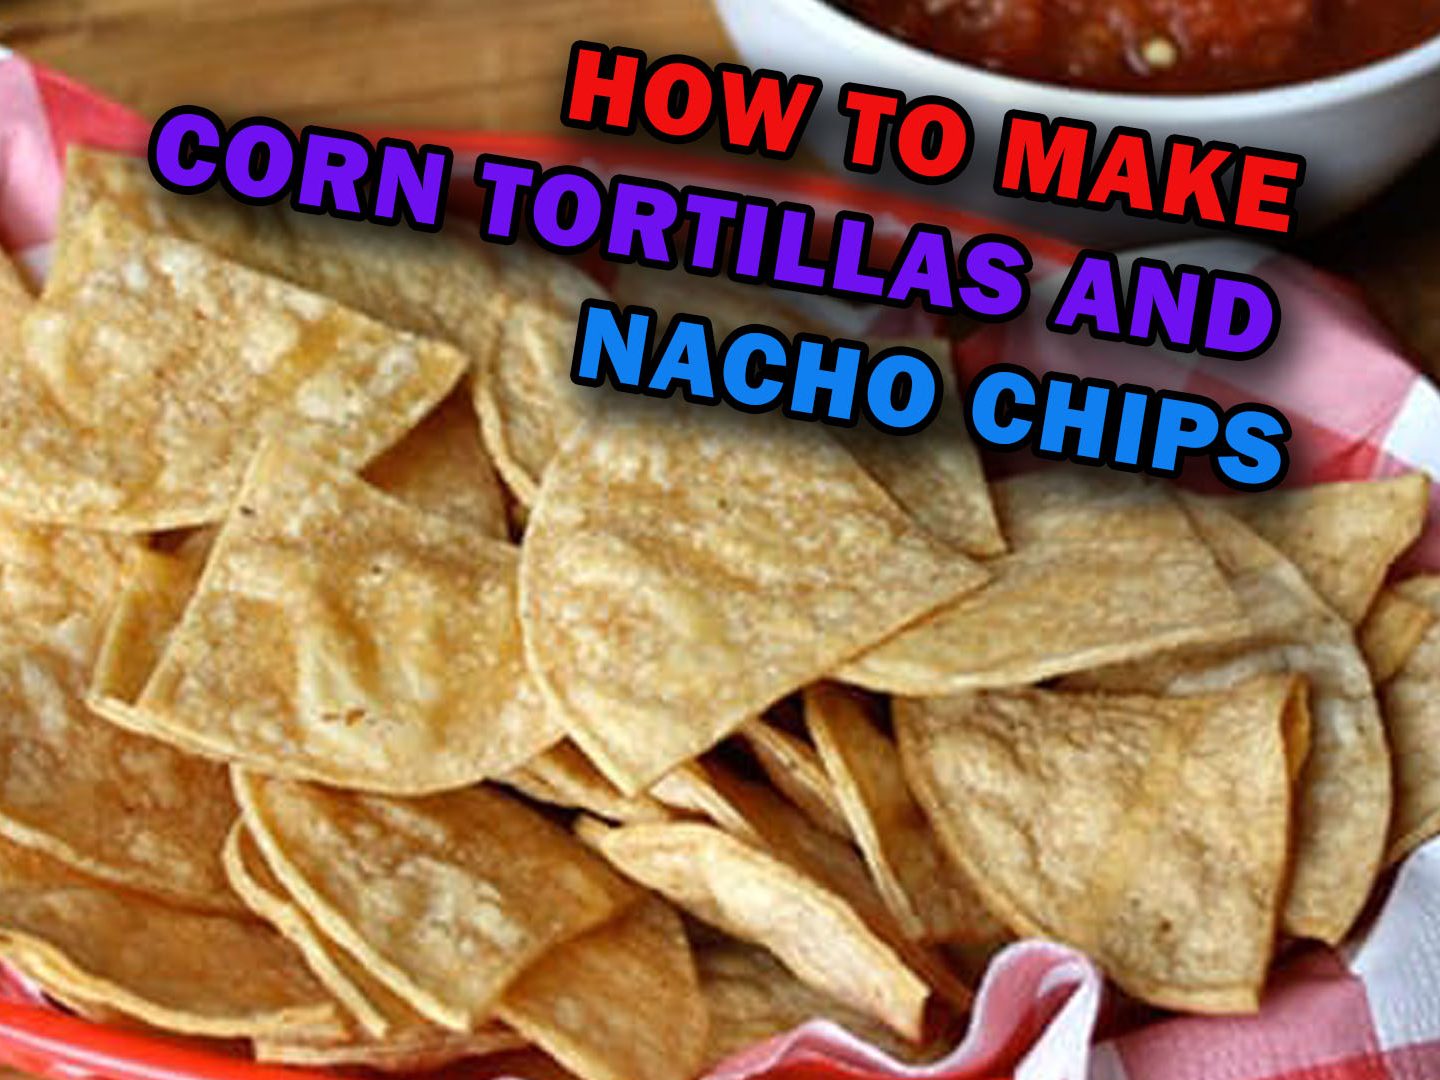 How to Make Corn Tortillas and Nacho Chips